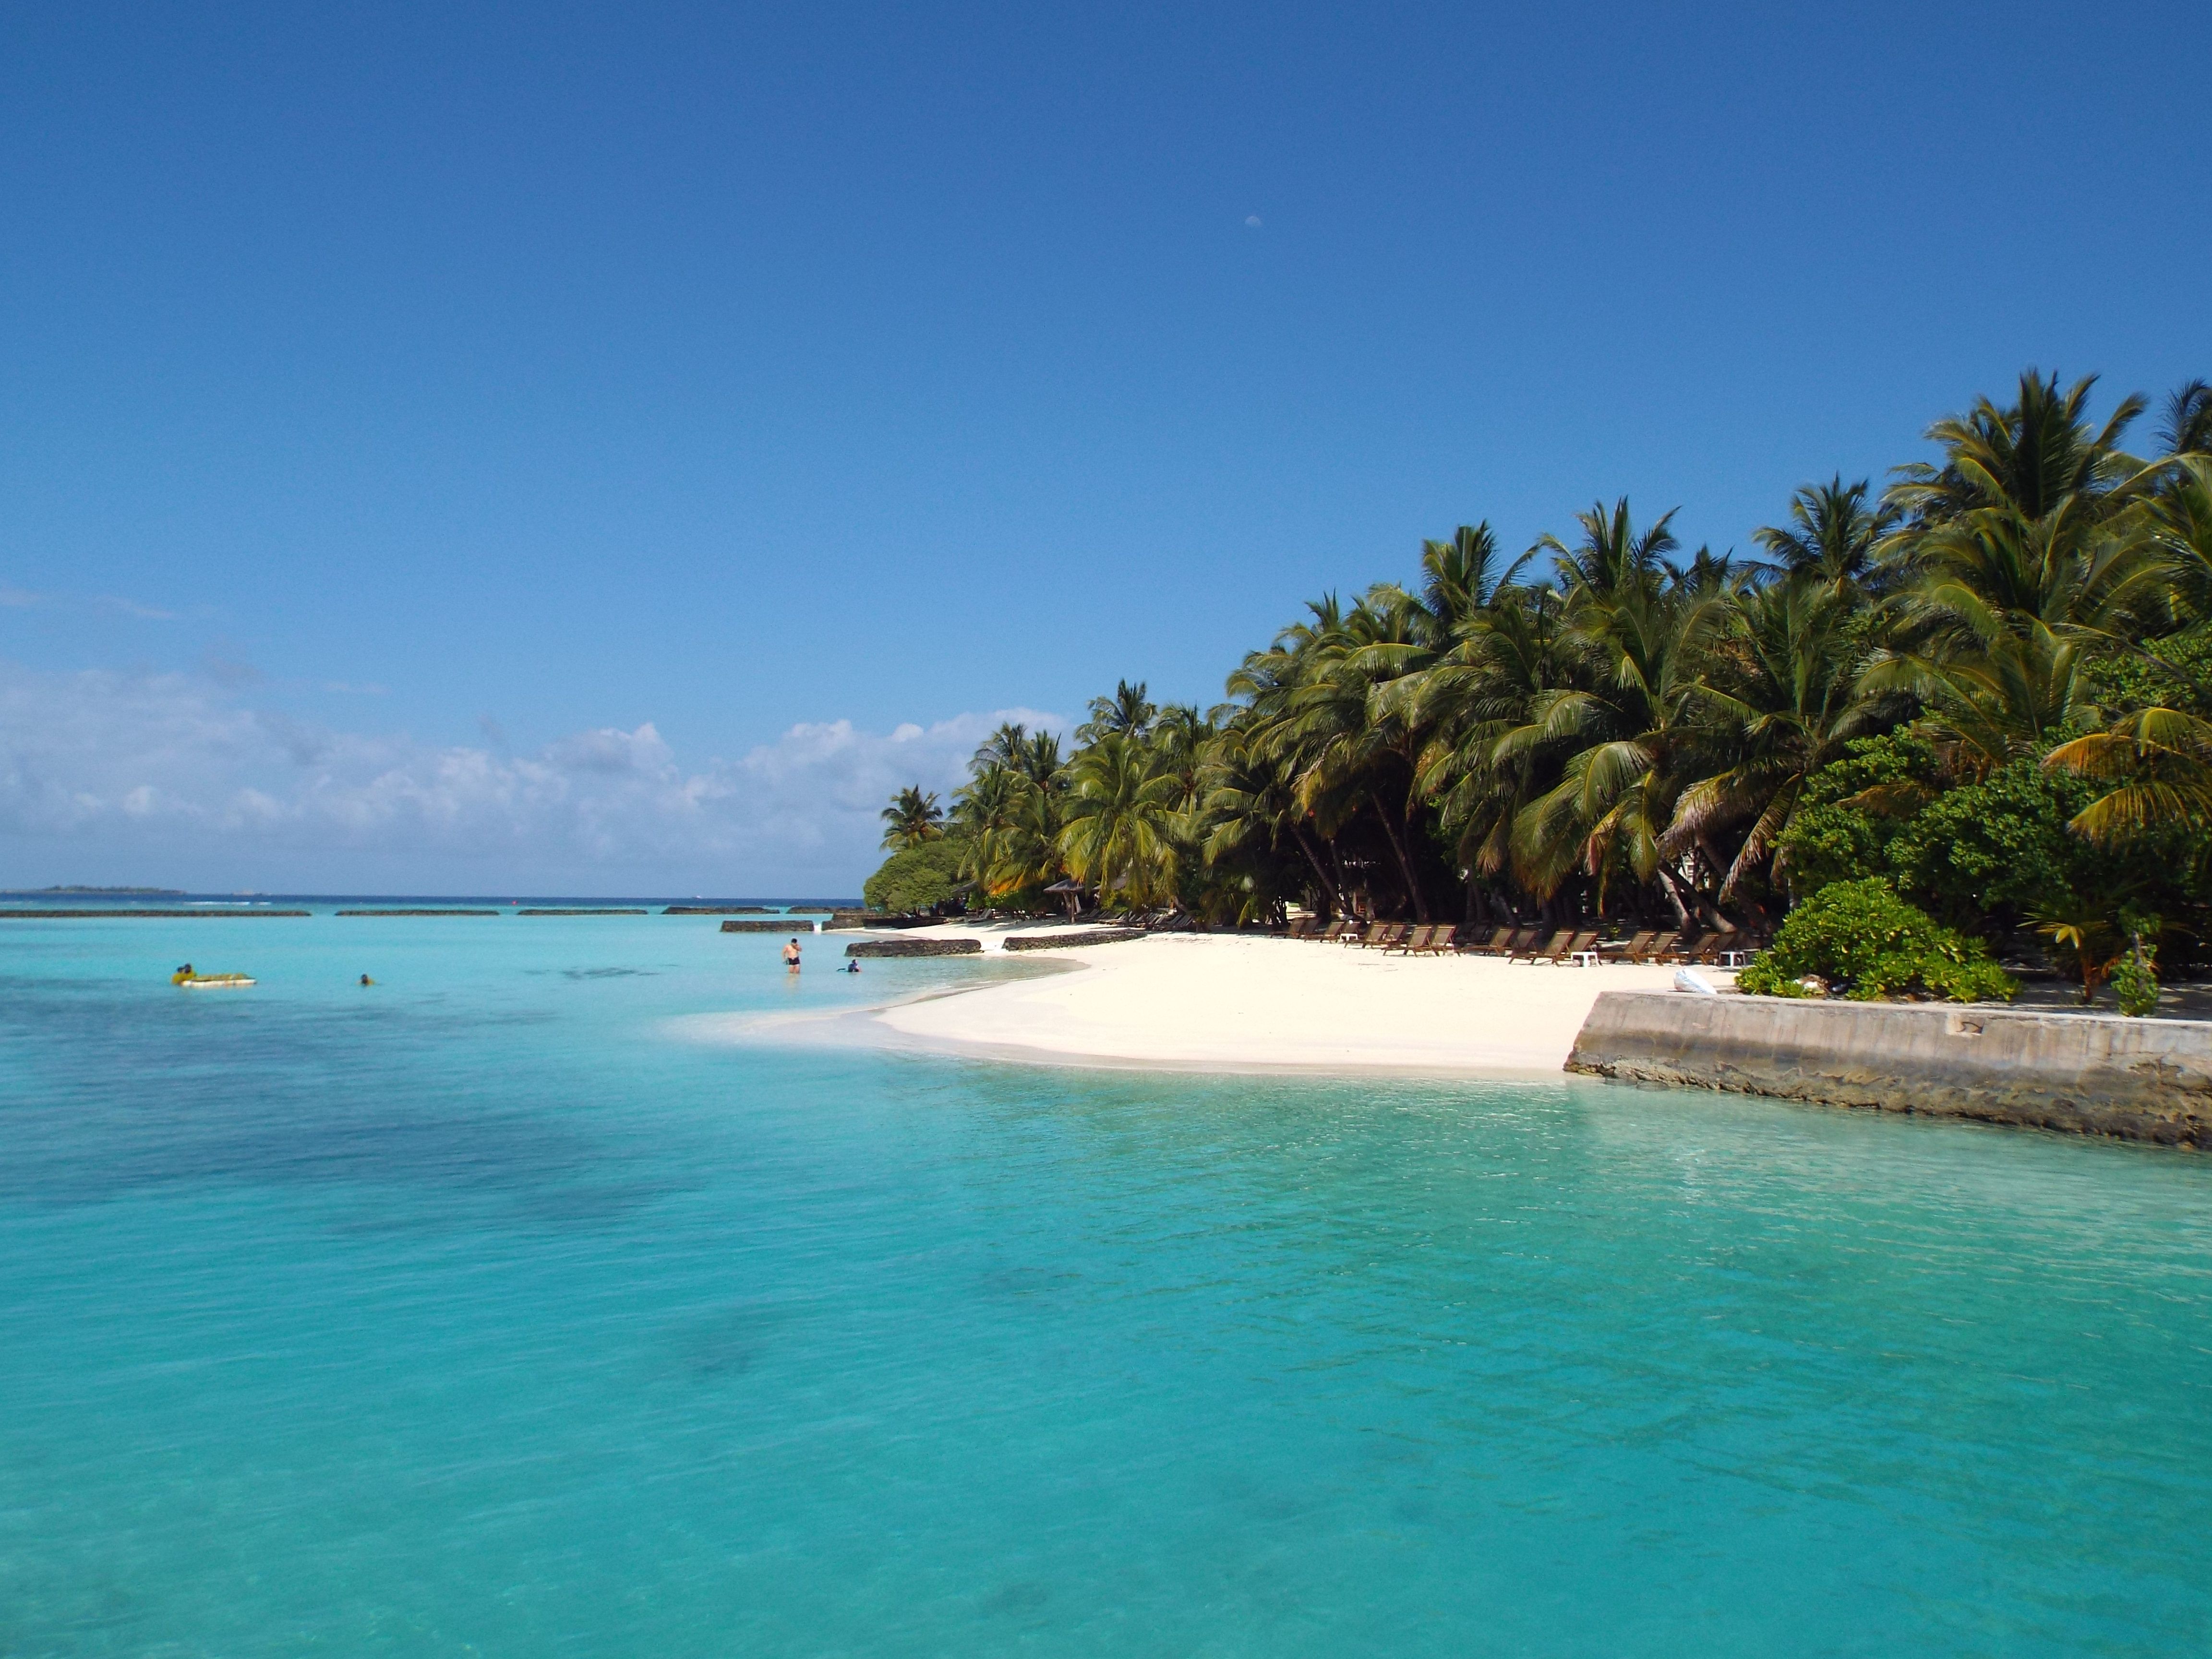 The #Maldives makes for a perfect, relaxing holiday destination ...